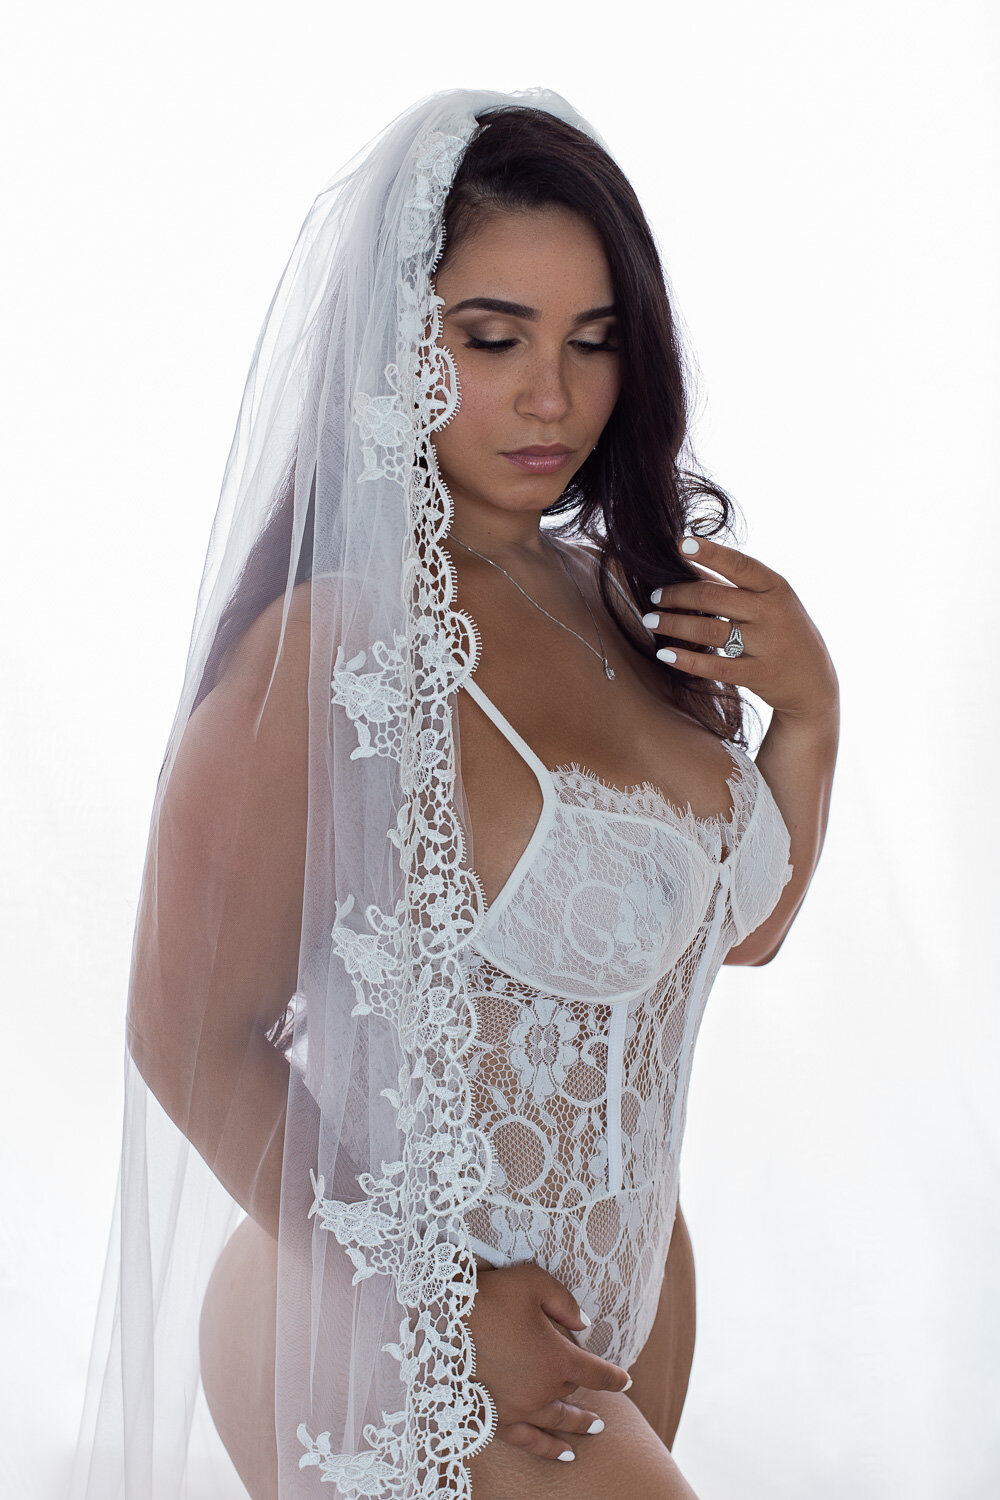 woman in white lace veil and white lace bodysuit